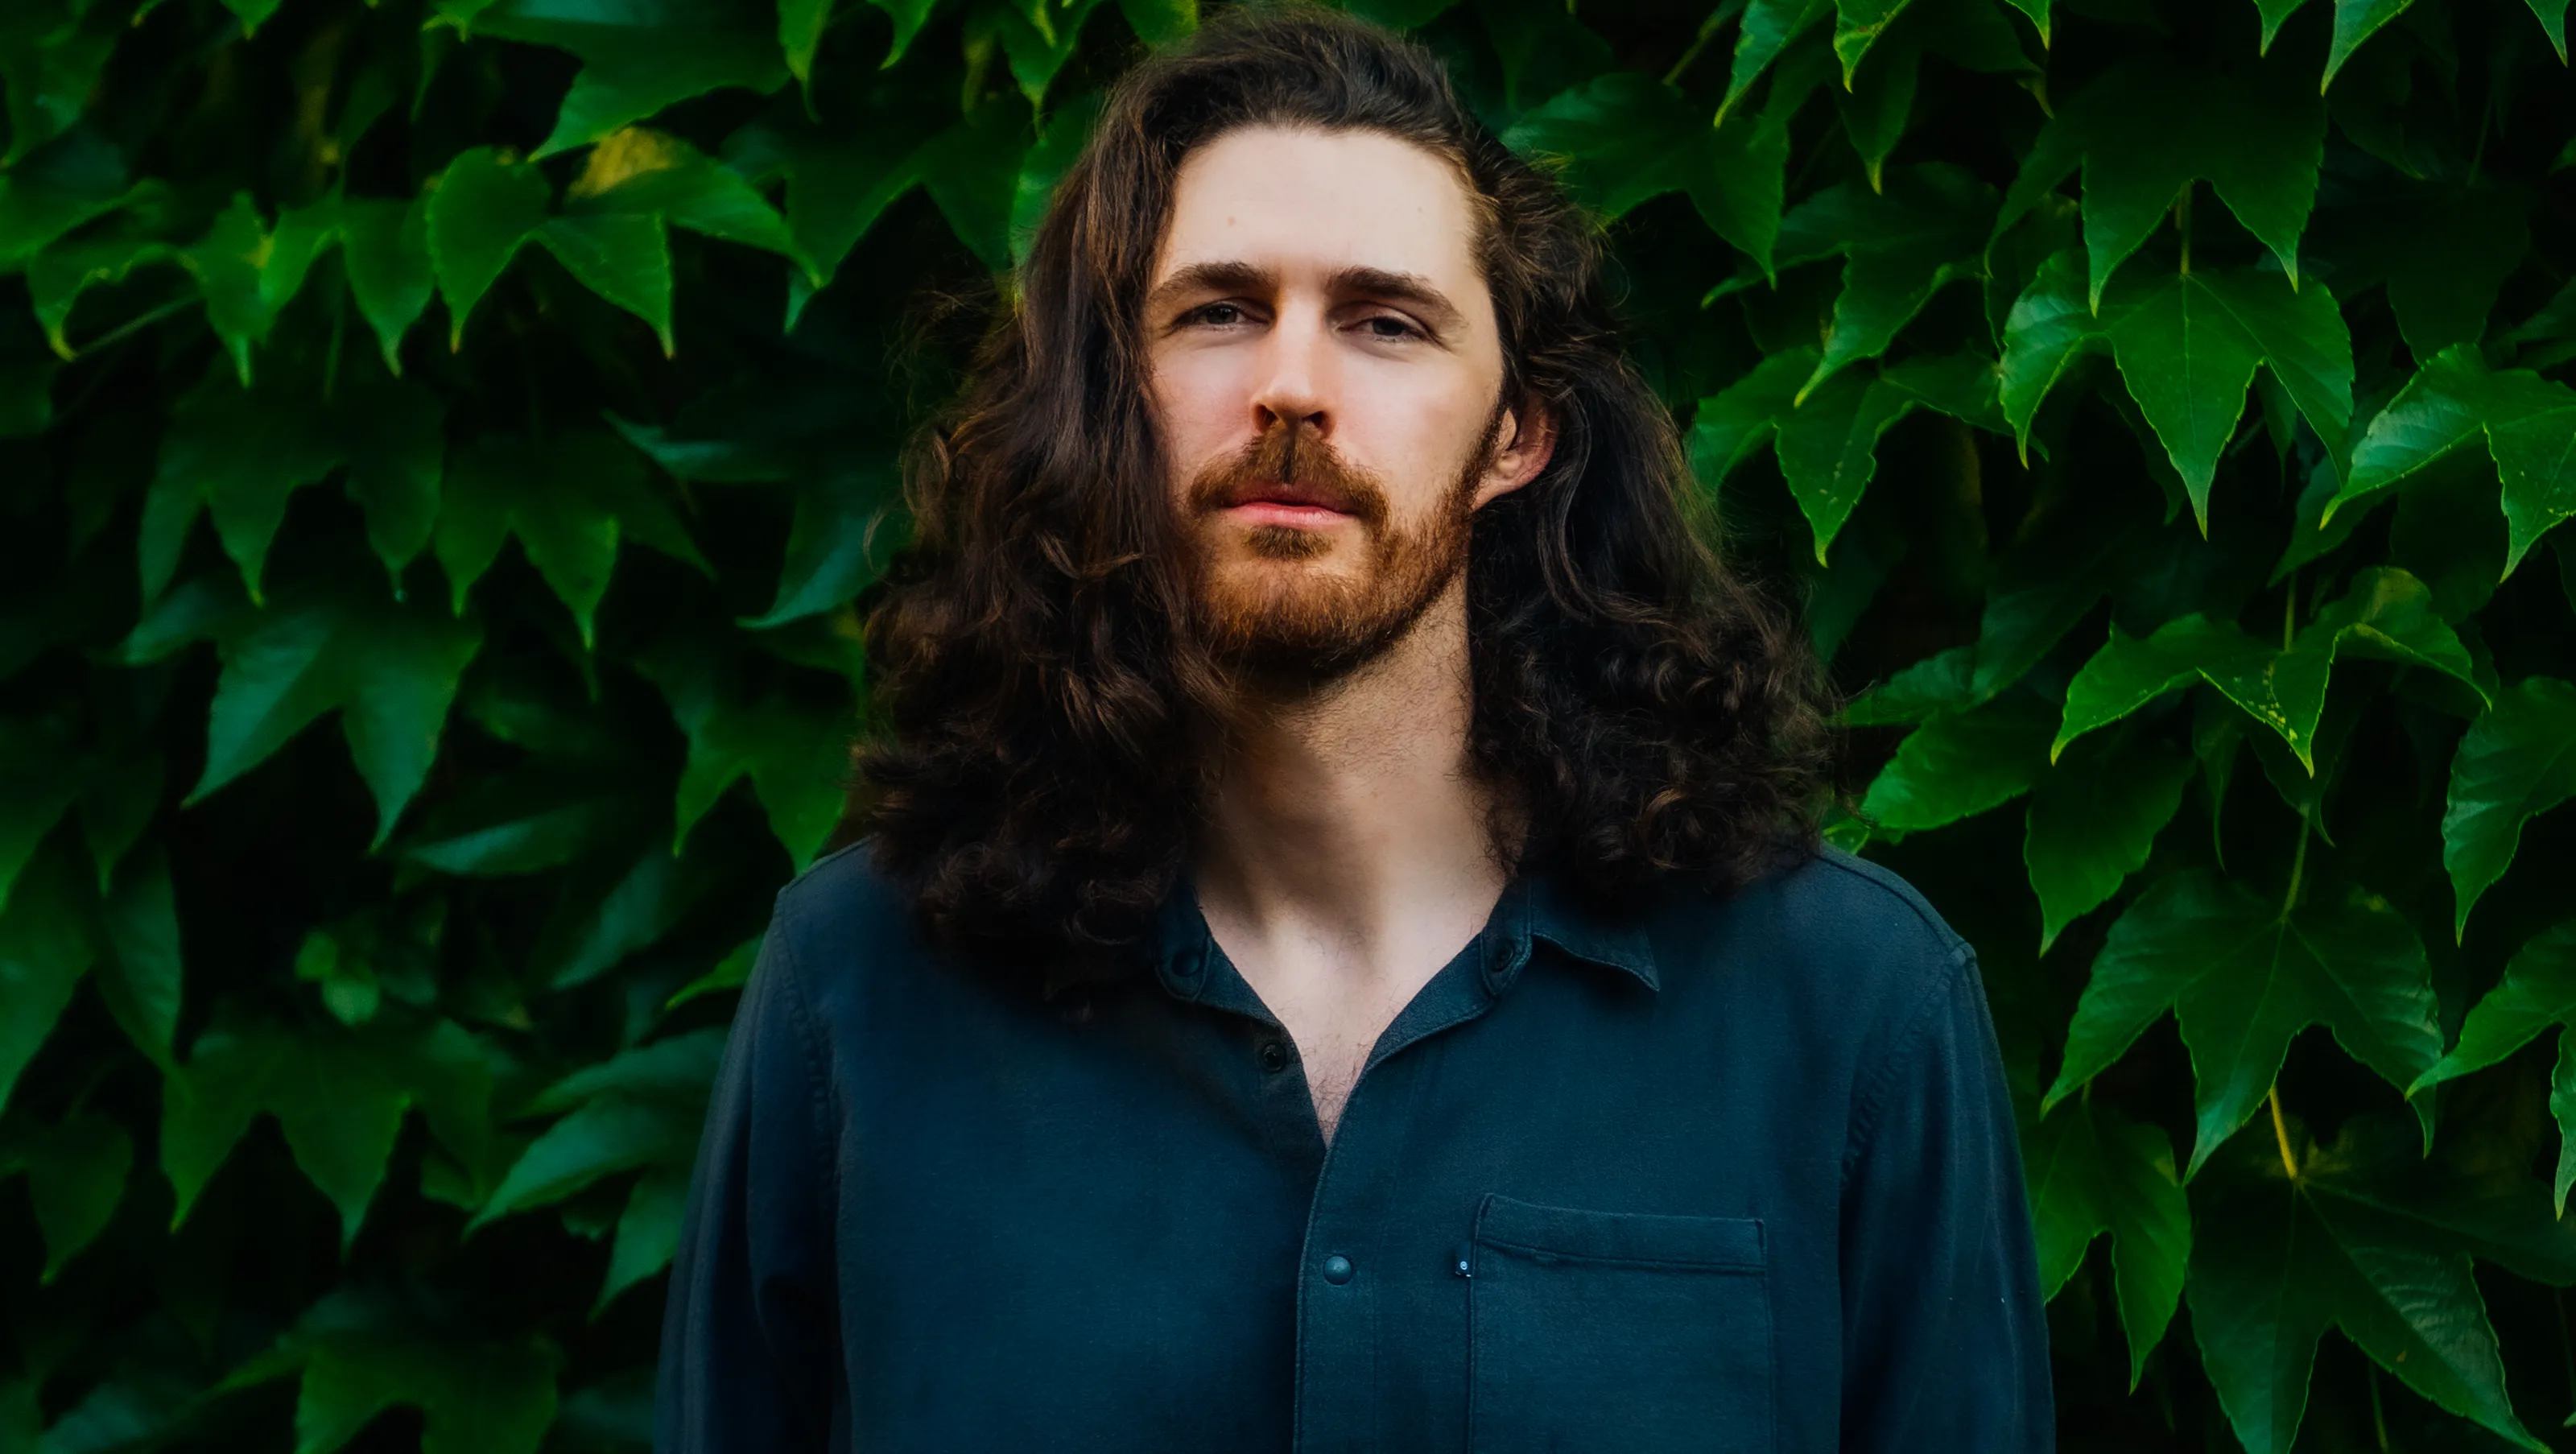 New Album Releases: UNREAL UNEARTH (Hozier) | The Entertainment Factor